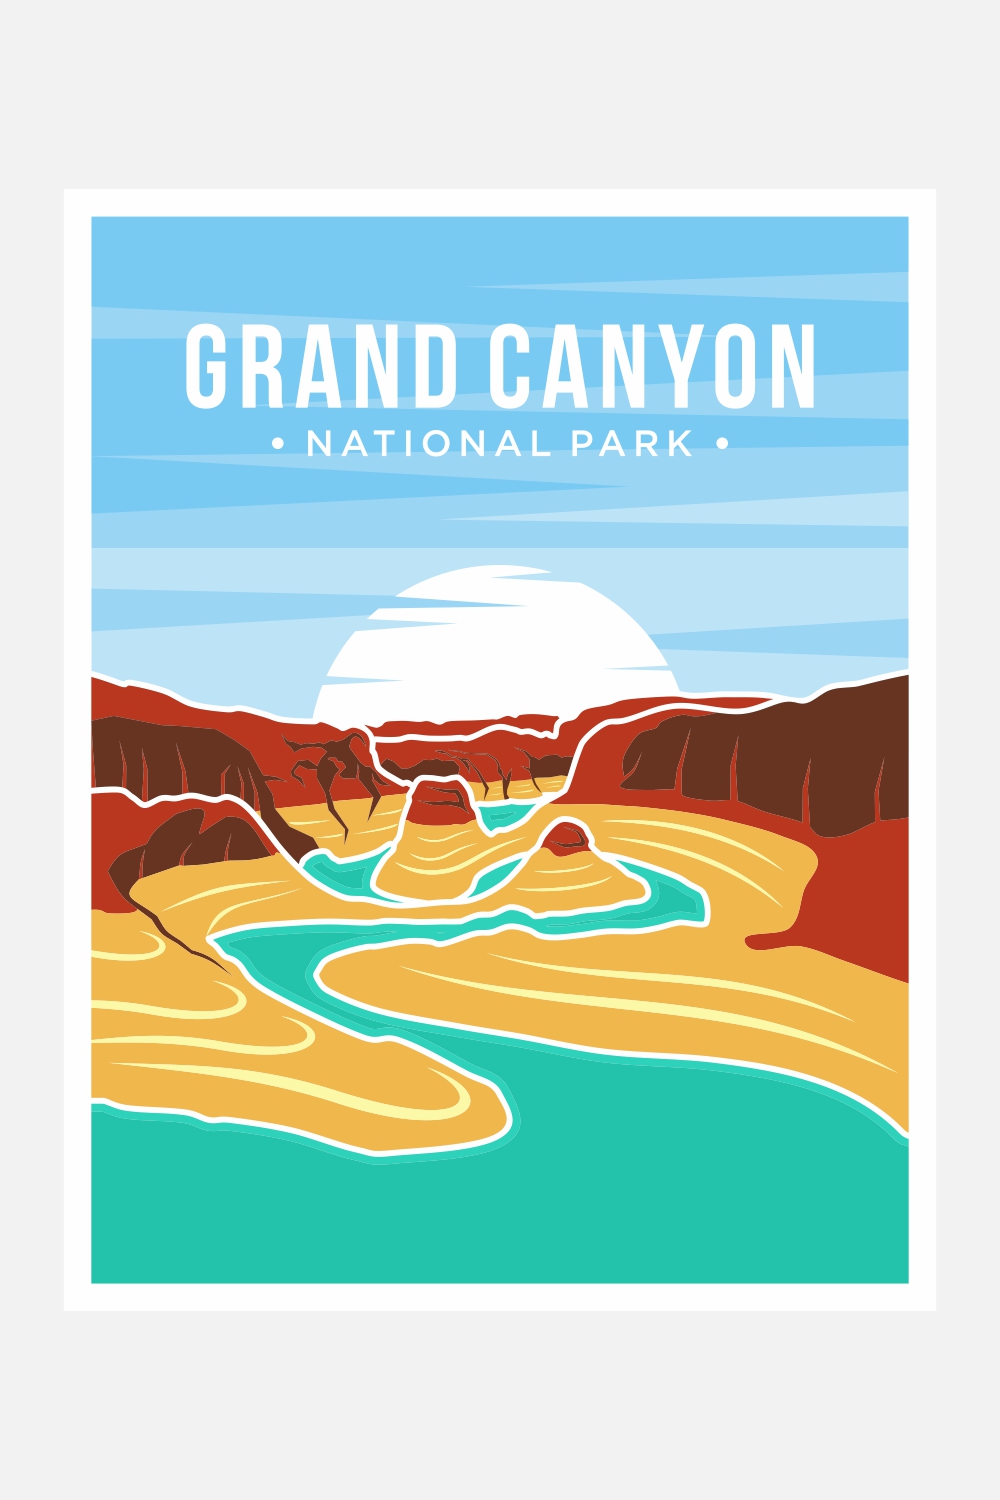 Grand Canyon National Park poster vector illustration design – Only $8 pinterest preview image.